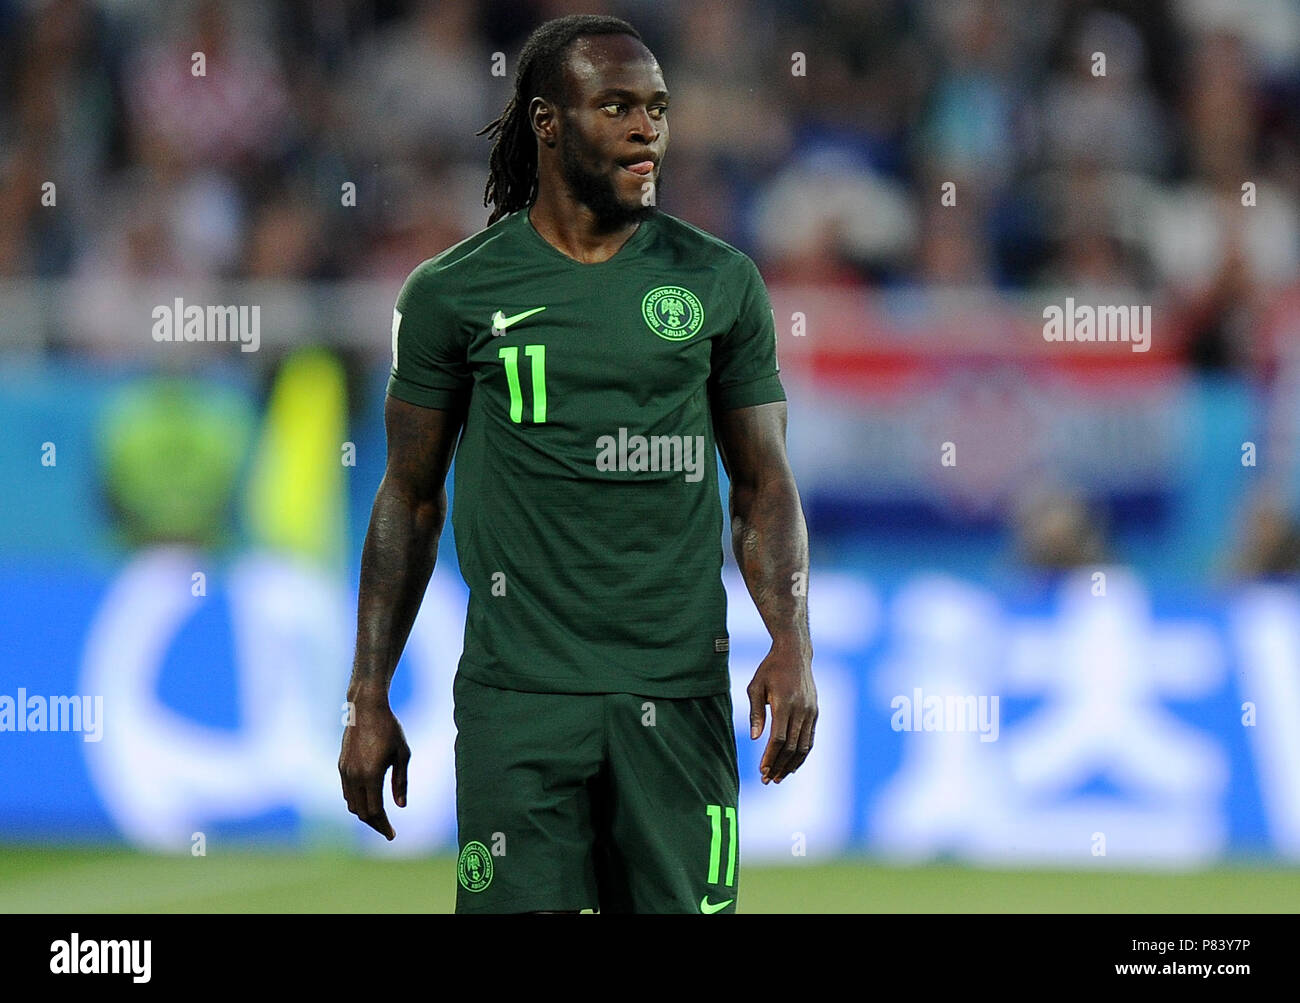 KALININGRAD, RUSSIA - JUNE 16: Victor Moses of Nigeria during the 2018 FIFA World Cup Russia group D match between Croatia and Nigeria at Kaliningrad Stadium on June 16, 2018 in Kaliningrad, Russia. (Photo by Norbert Barczyk/PressFocus/MB Media) Stock Photo